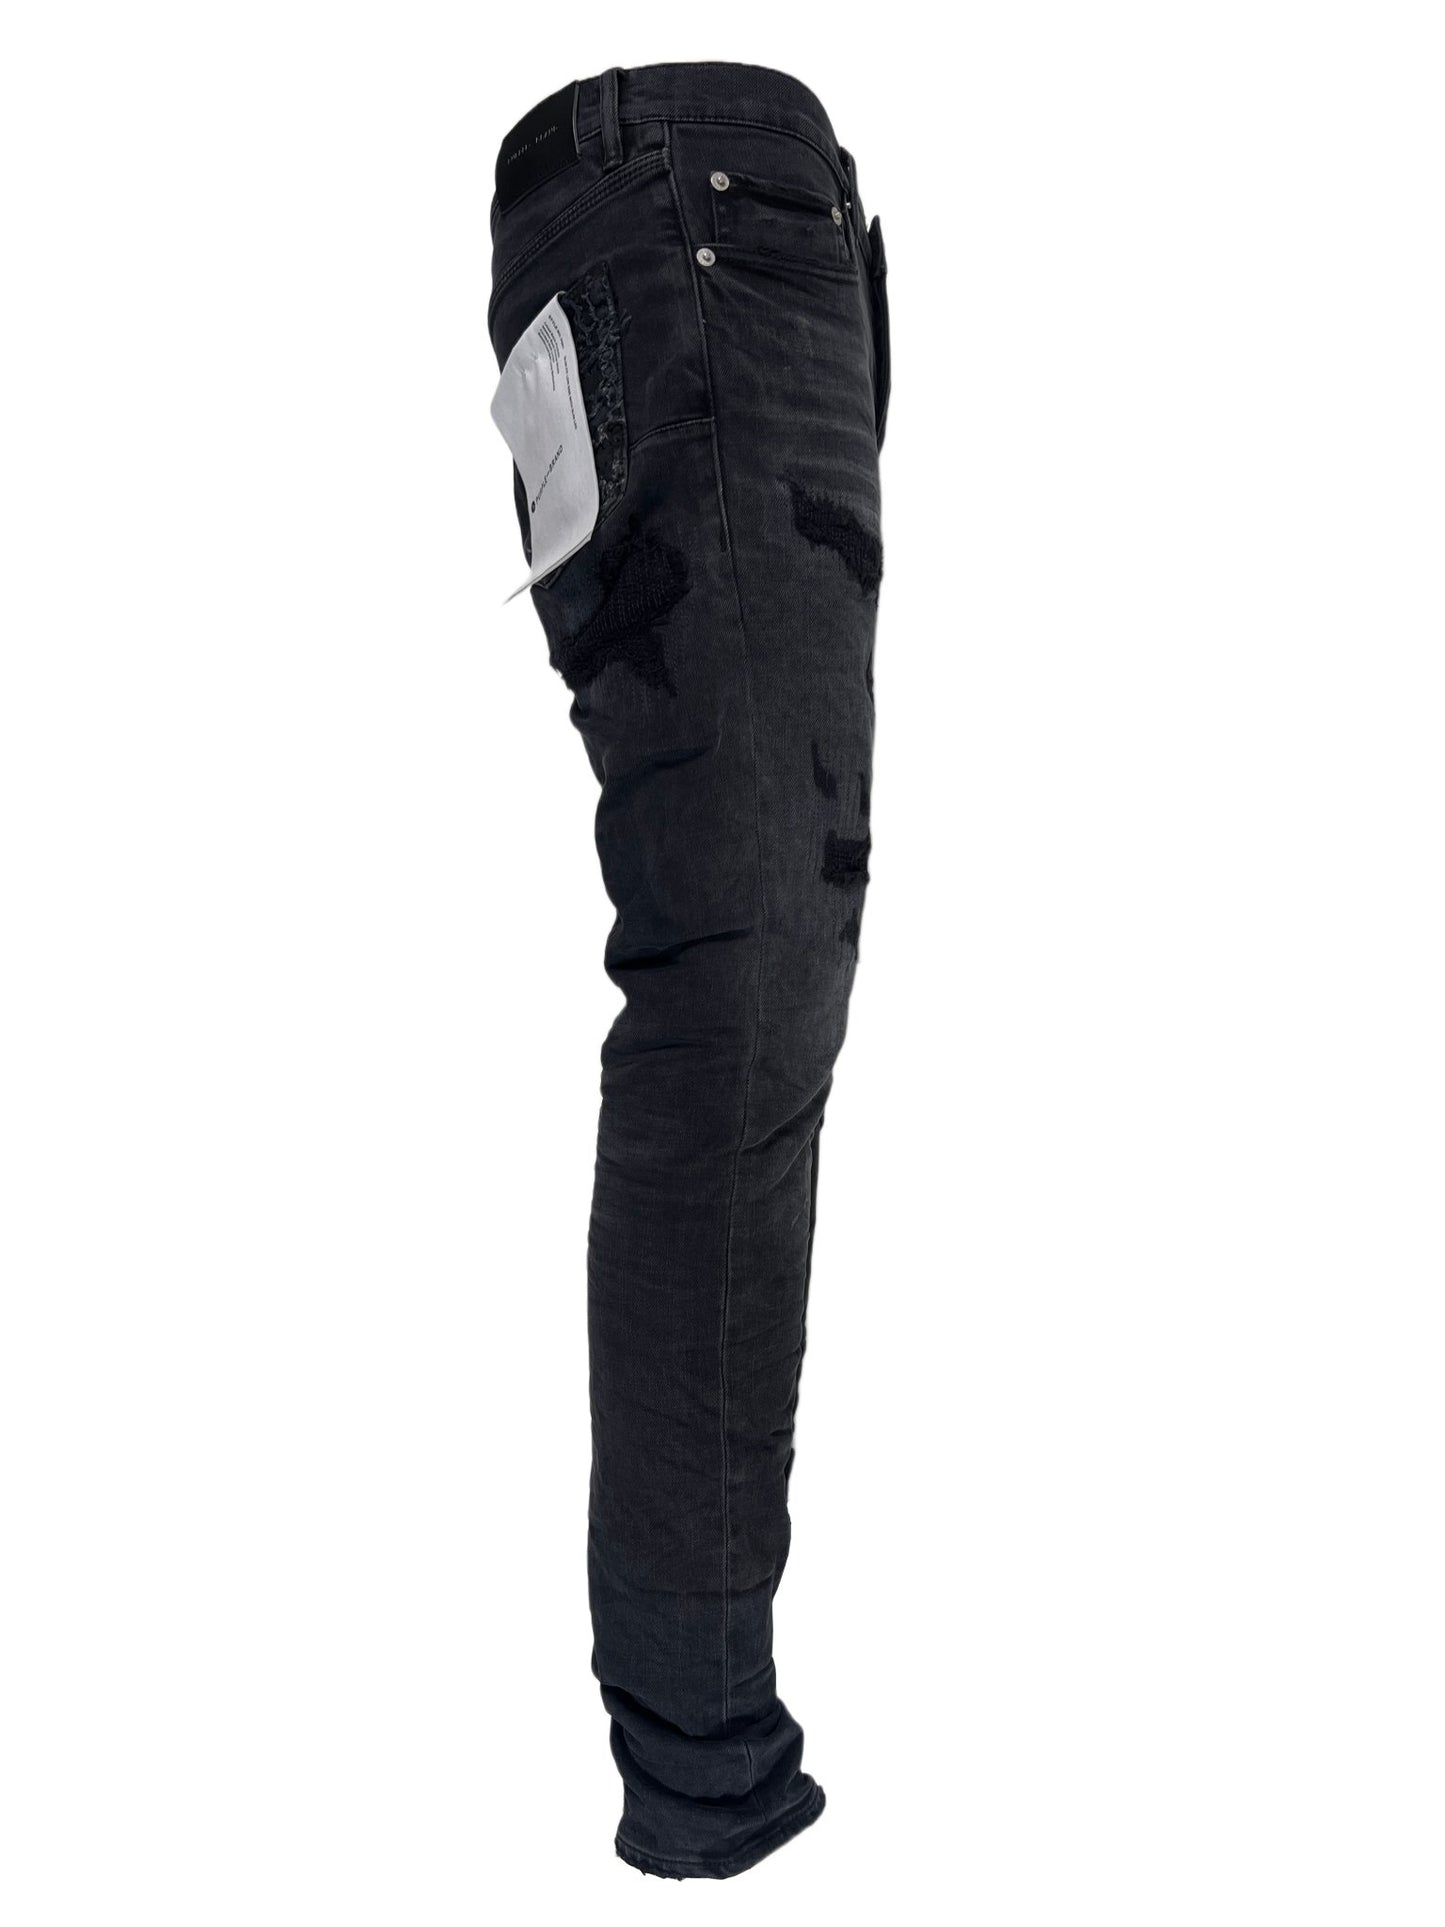 A pair of PURPLE BRAND JEANS P001-BQDP BLACK QUILTED DESTROY PKT with a pocket on the back.